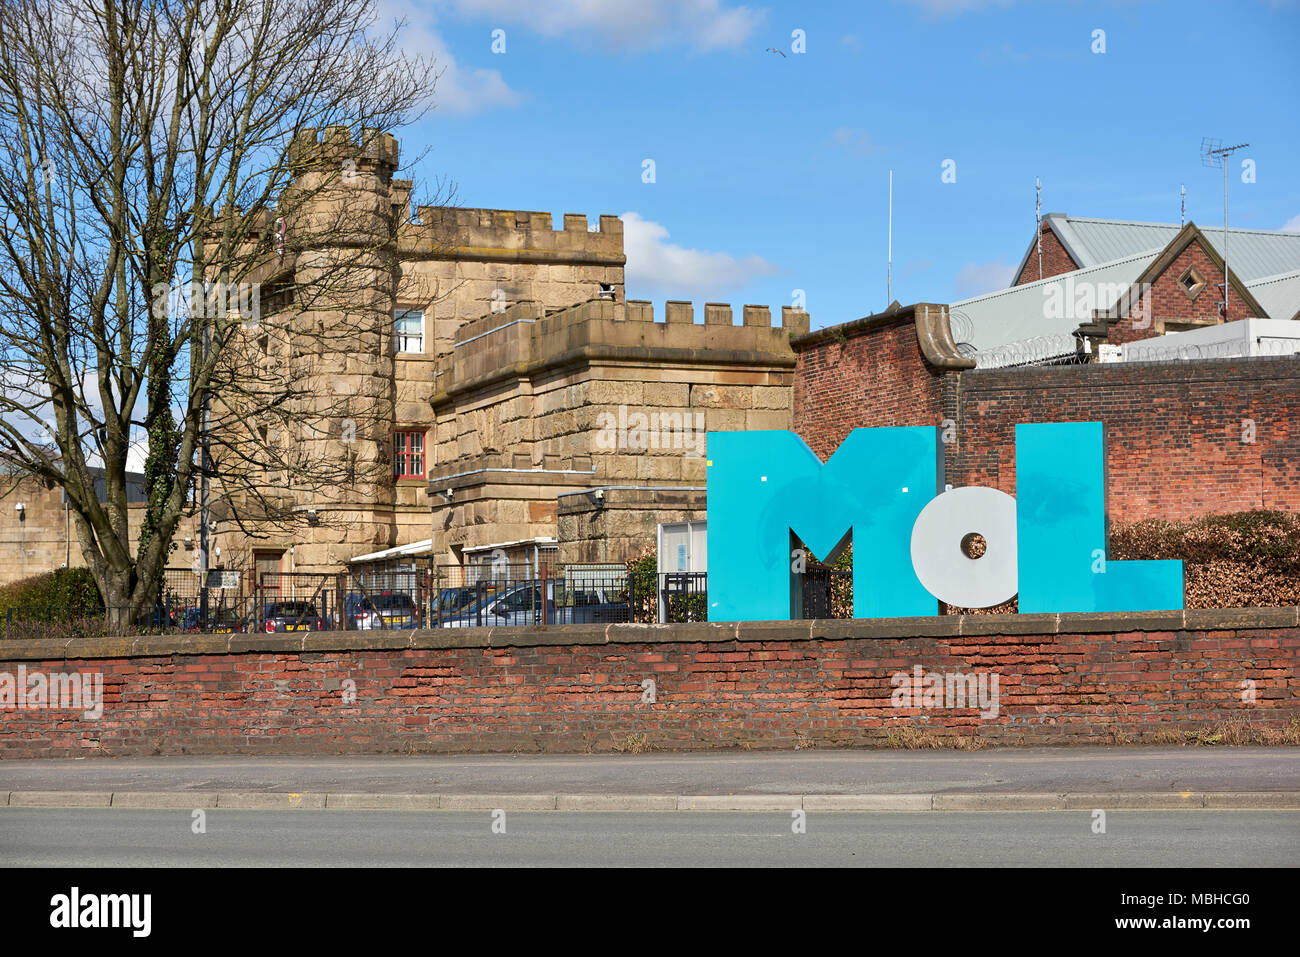 Museum of Lancashire logo with the courthouse in which it's hosted in the background. The museum has been closed since 2016. Stock Photo